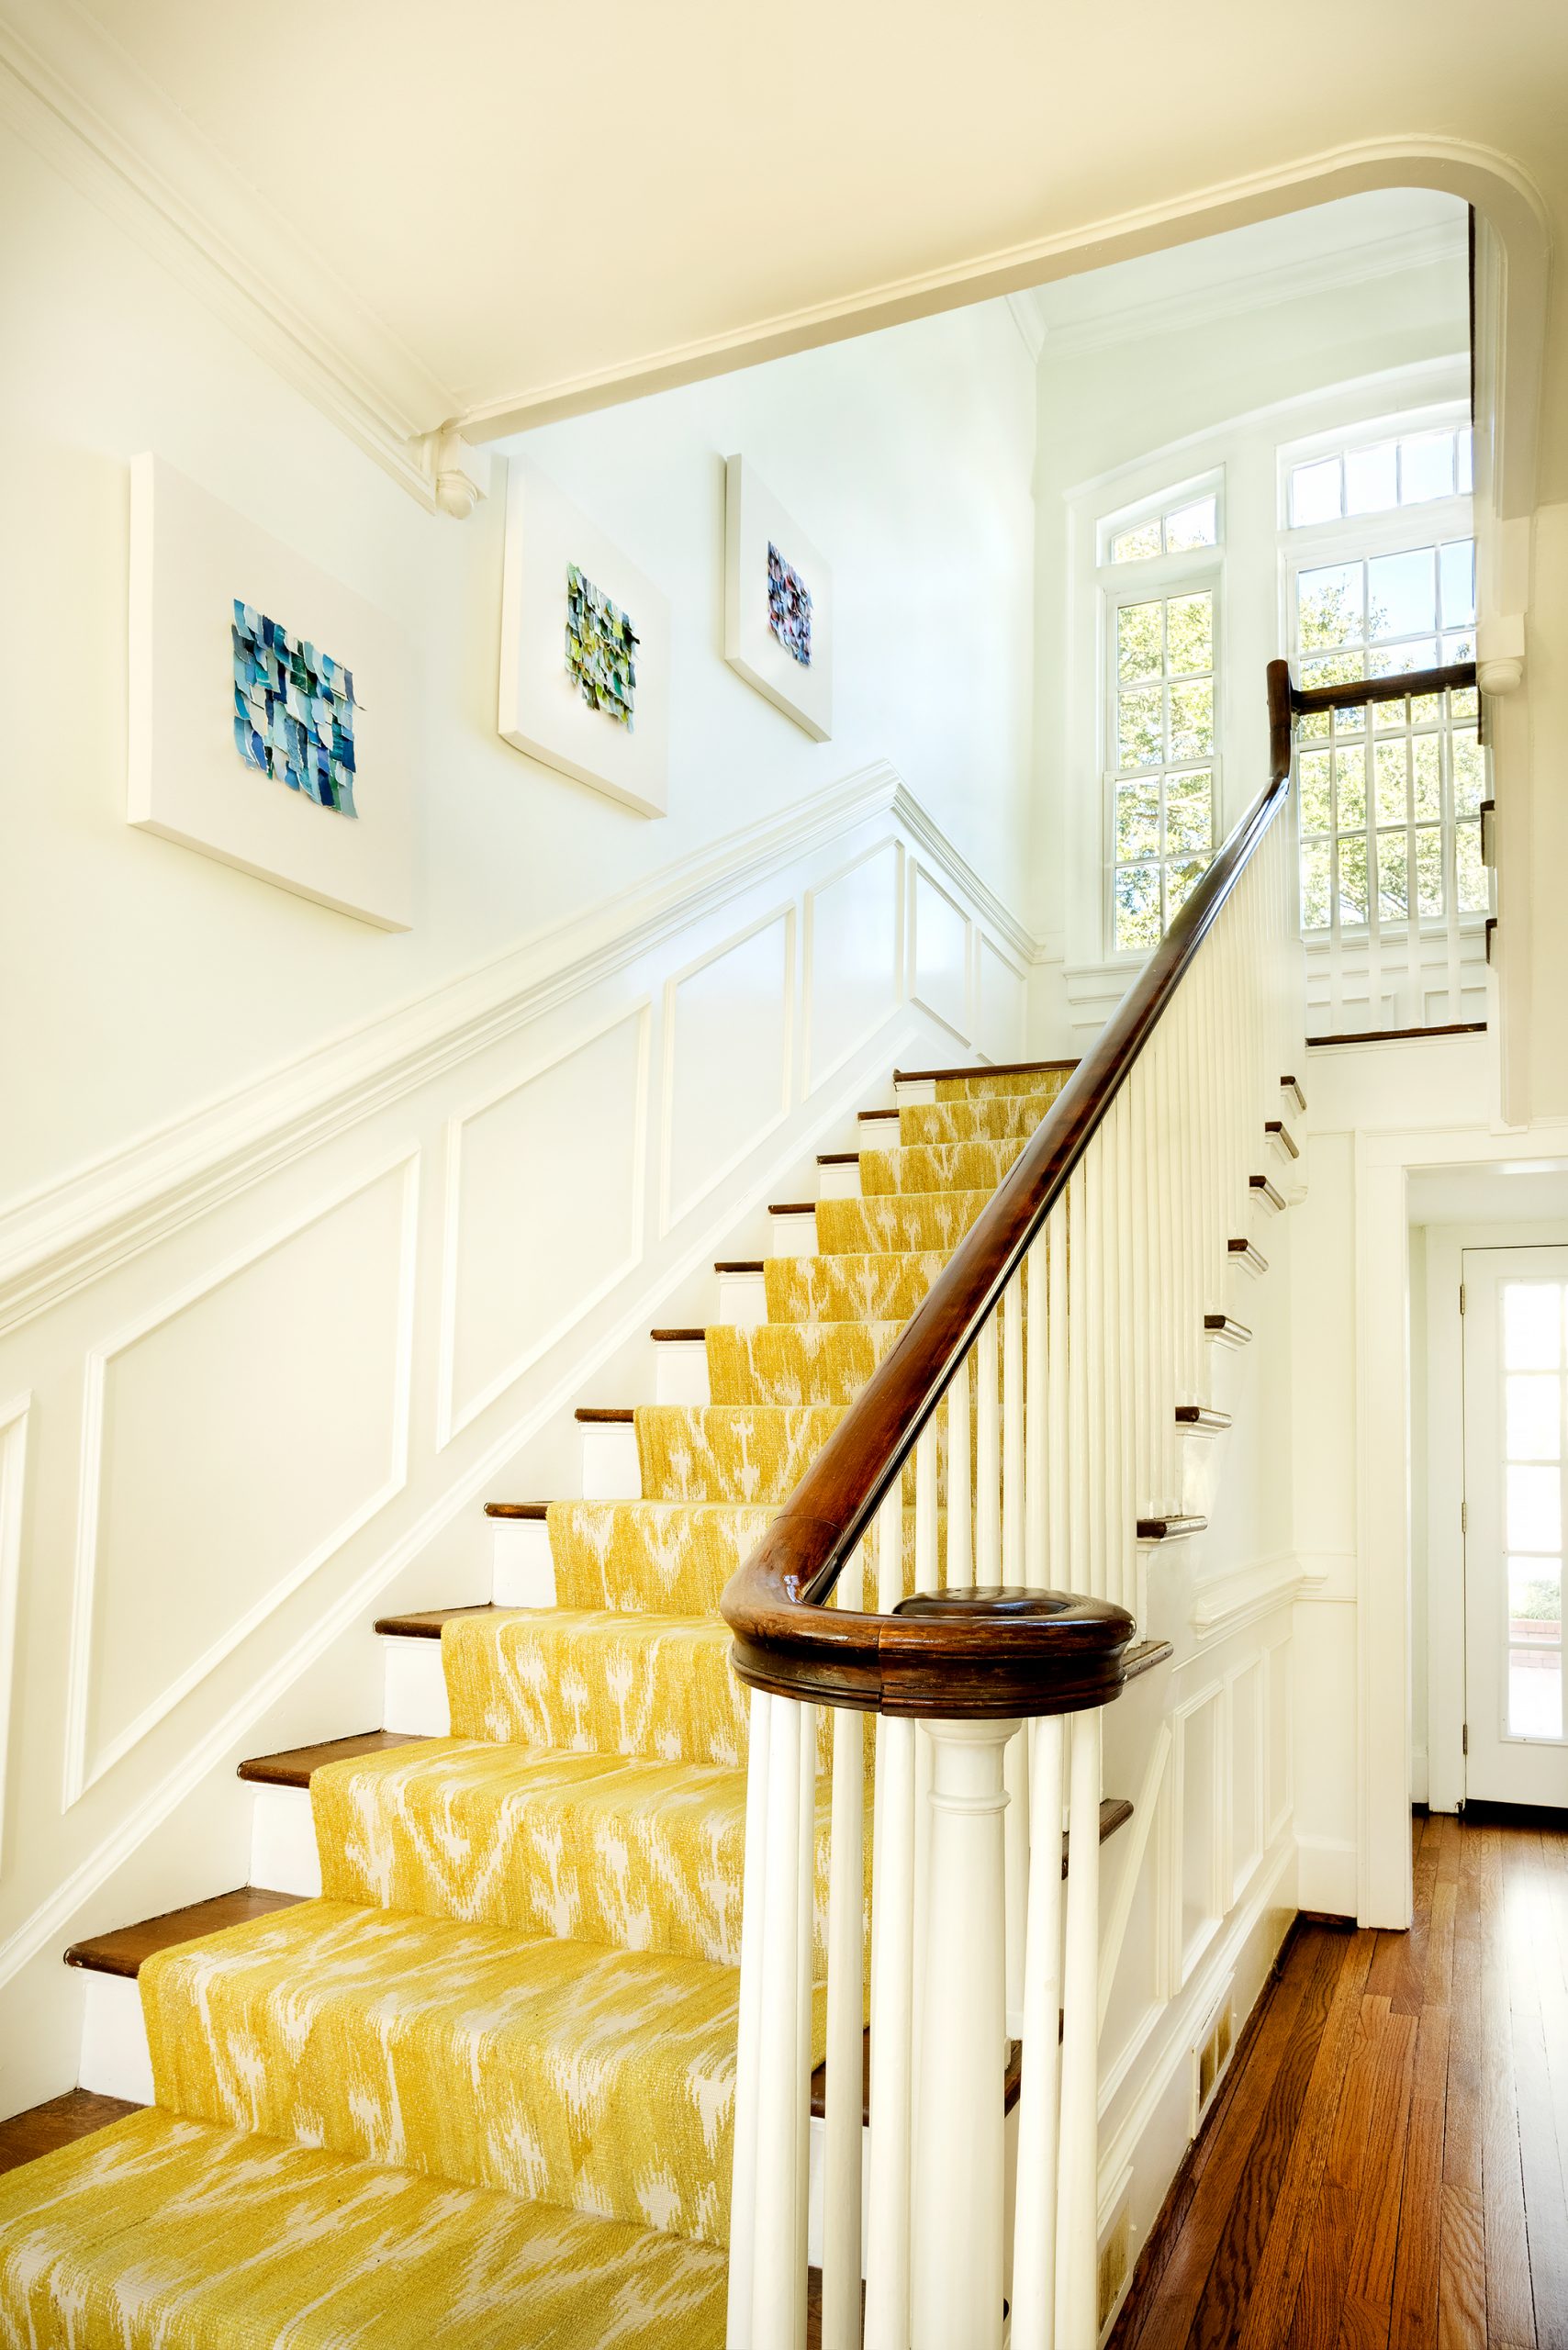 Art is everywhere in Karen’s home, and she not only has an eye for collecting it but also creating it. Along the staircase in their central hall, Karen has hung a series of canvases she created that are textured color studies made with strips of paper. 